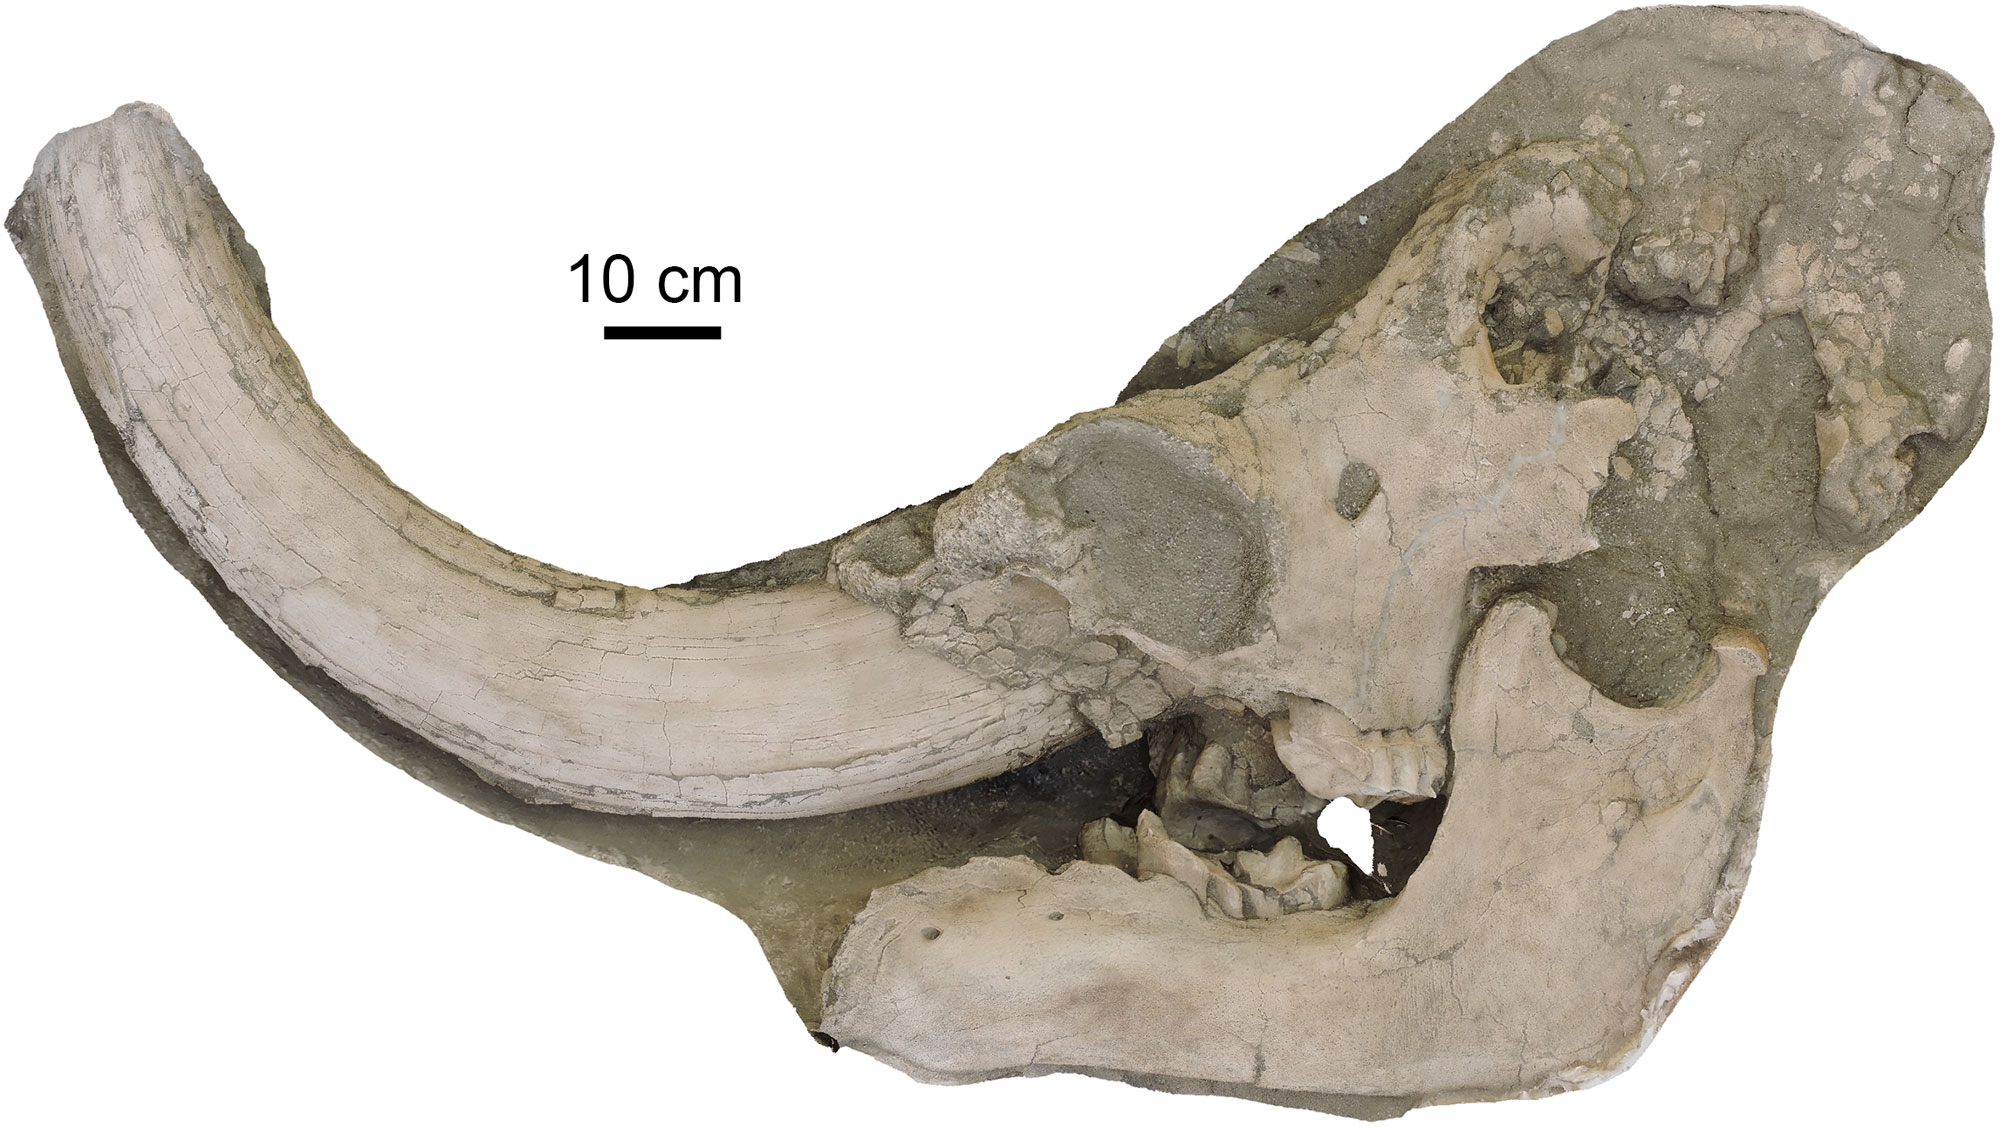 Skull of a Pacific mastodon from Riverside, California, shown in side view. 